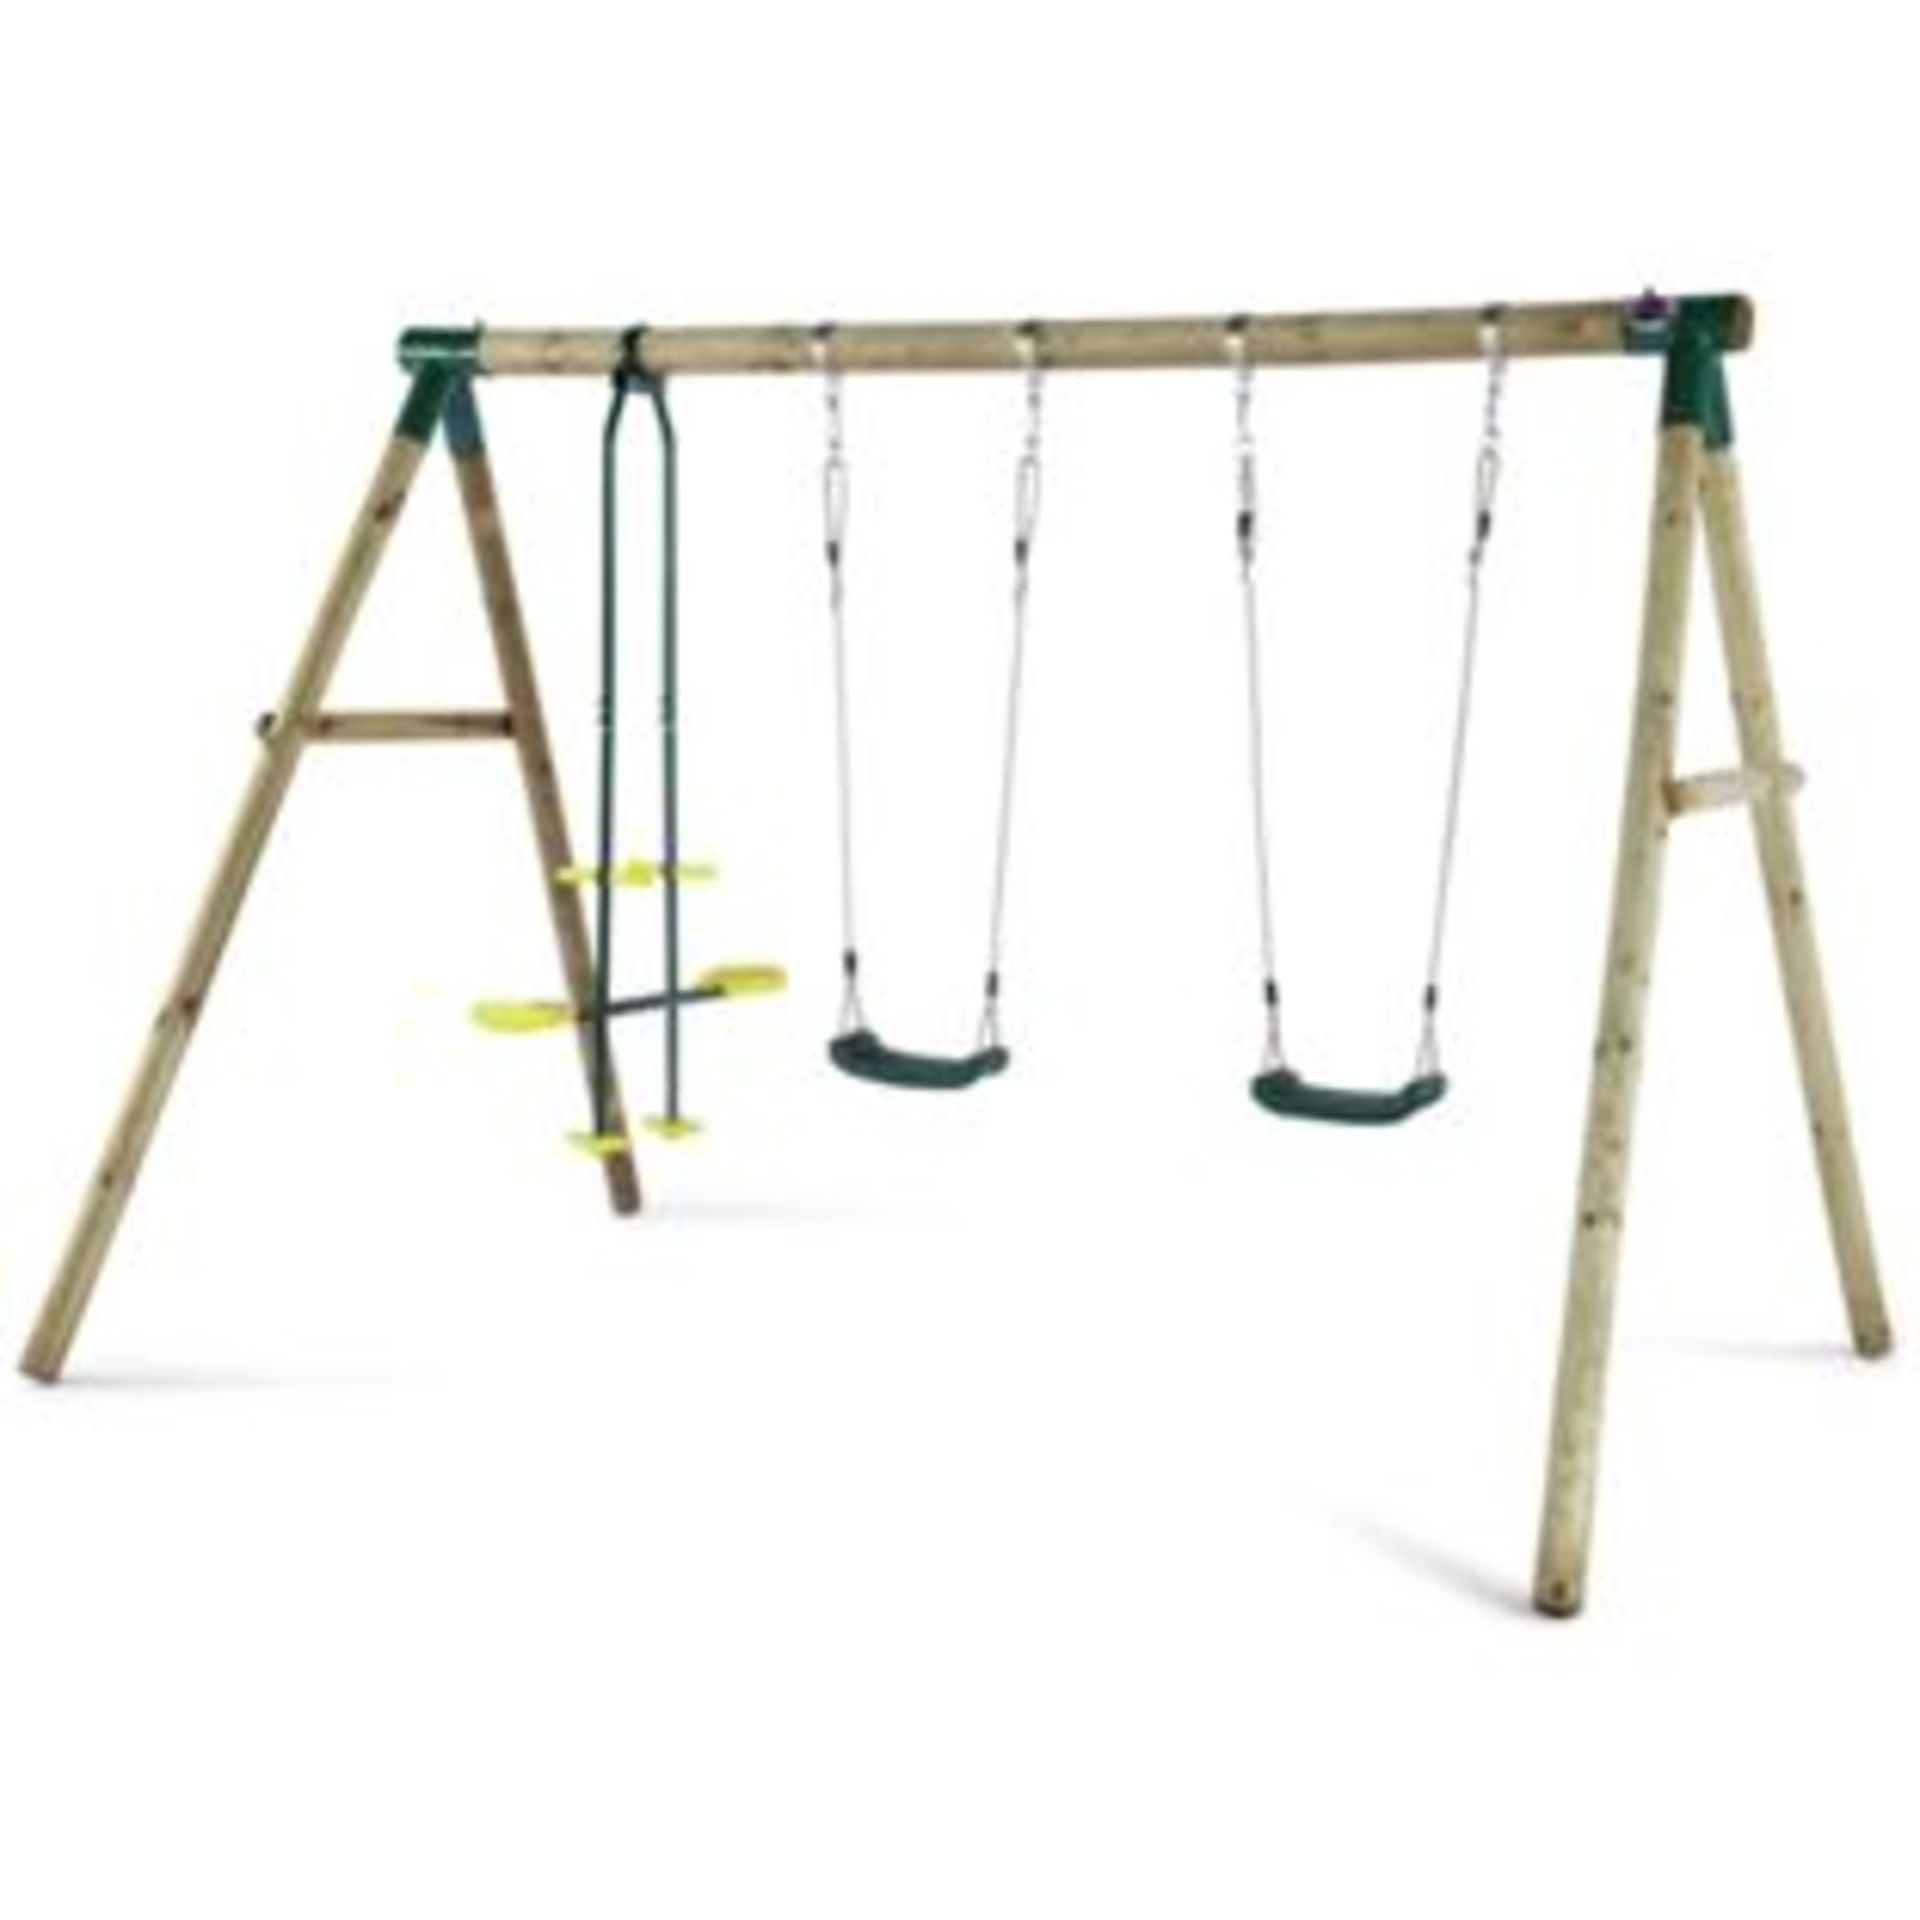 1 x Plum Double Swing with Glider Wooden Garden Swing Set. RRP £249.99. A fabulous swing set for